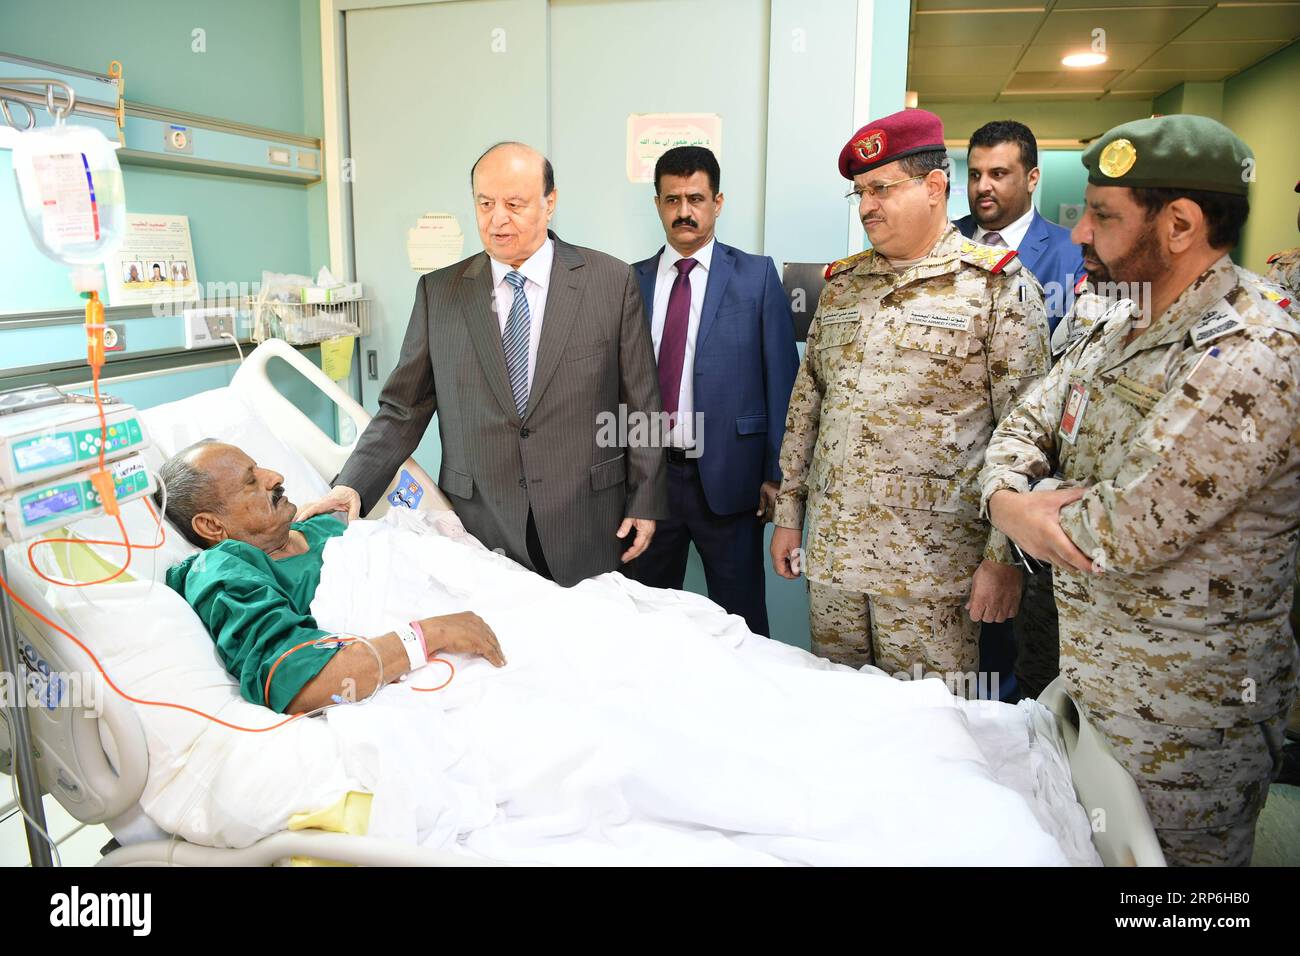 (190113) -- RIYADH, Jan. 13, 2019 -- Yemen s internationally-backed President Abdu-Rabbu Mansour Hadi (2nd L) visits Director of the country s Military College Abdulkaream Azowmahi who is receiving treatment at a military hospital in Saudi Arabia s capital Riyadh, Jan. 13, 2019. Abdu-Rabbu Mansour Hadi paid a visit on Sunday to a hospital in Saudi Arabia to inspect health conditions of officials injured by a Houthi drone strike in southern Lahj province three days ago. SAUDI ARABIA-RIYADH-YEMENI PRESIDENT-INJURED OFFICIALS-VISIT NiexYunpeng PUBLICATIONxNOTxINxCHN Stock Photo